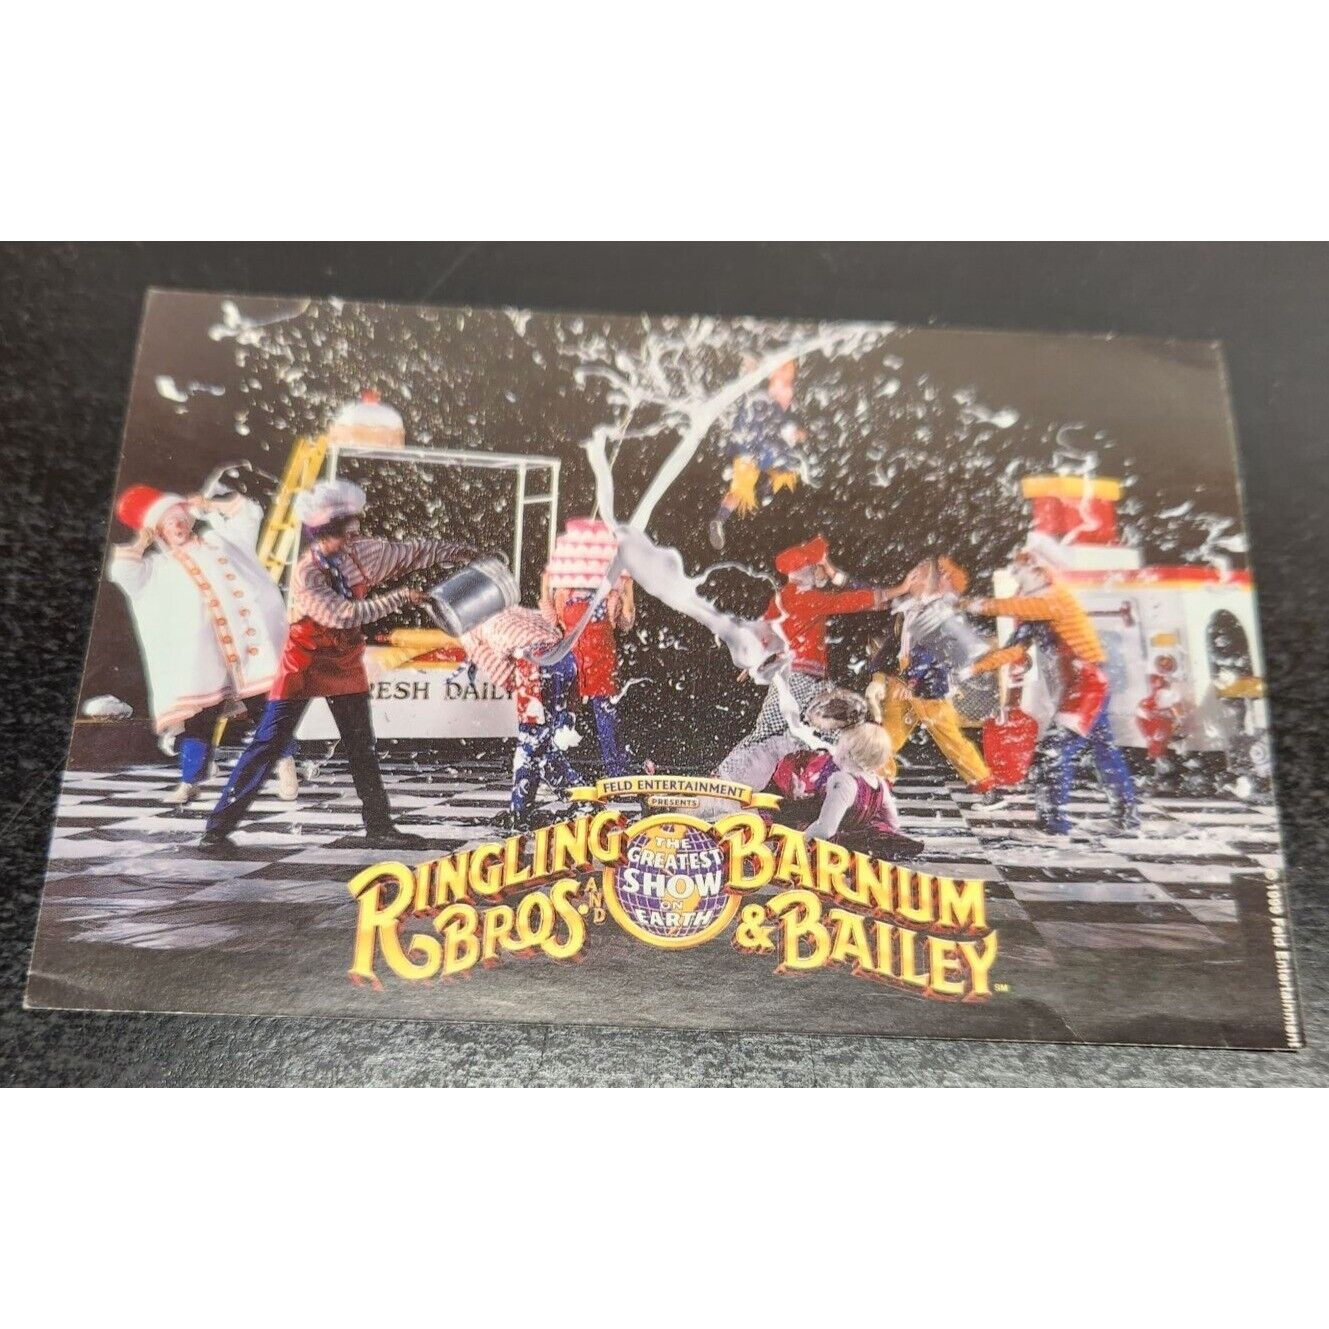 2005 Ringling Brothers and Barnum & Bailey Circus Postcard of Clowns